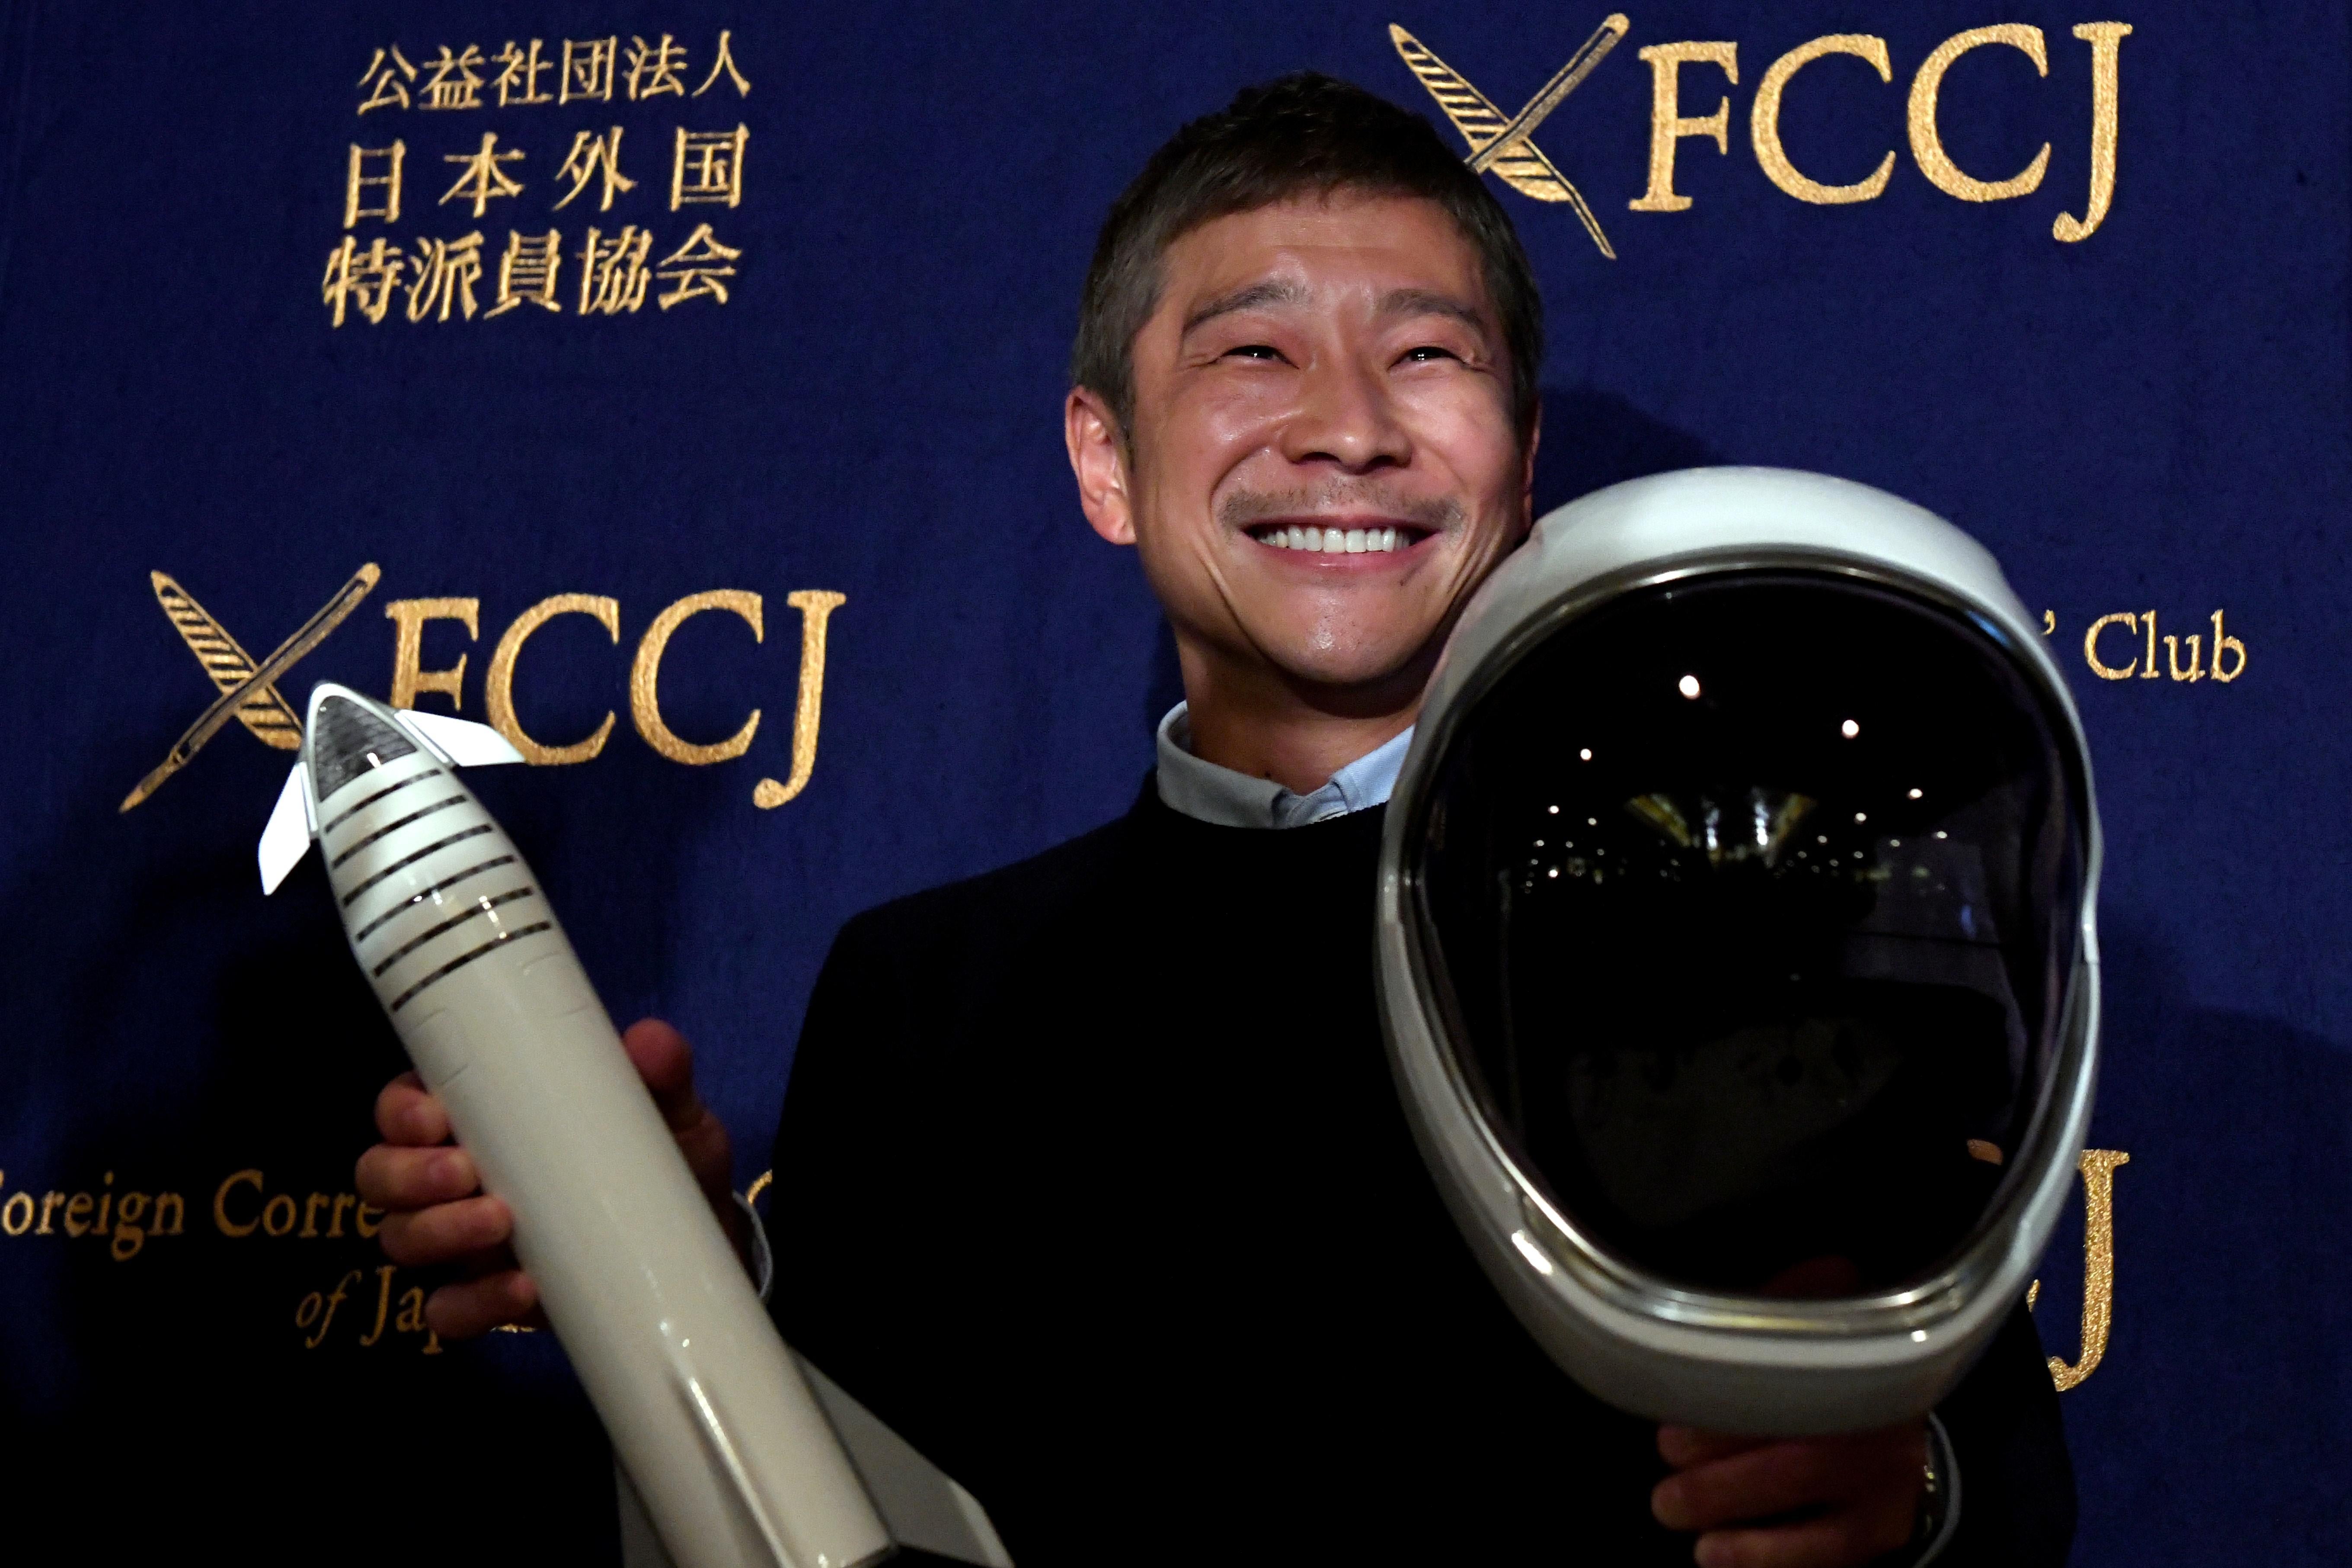 Yusaku Maezawa holds a model rocket in one hand and a space helmet in the other at a SpaceX event. He is smiling broadly and wearing a collared shirt under a sweater.